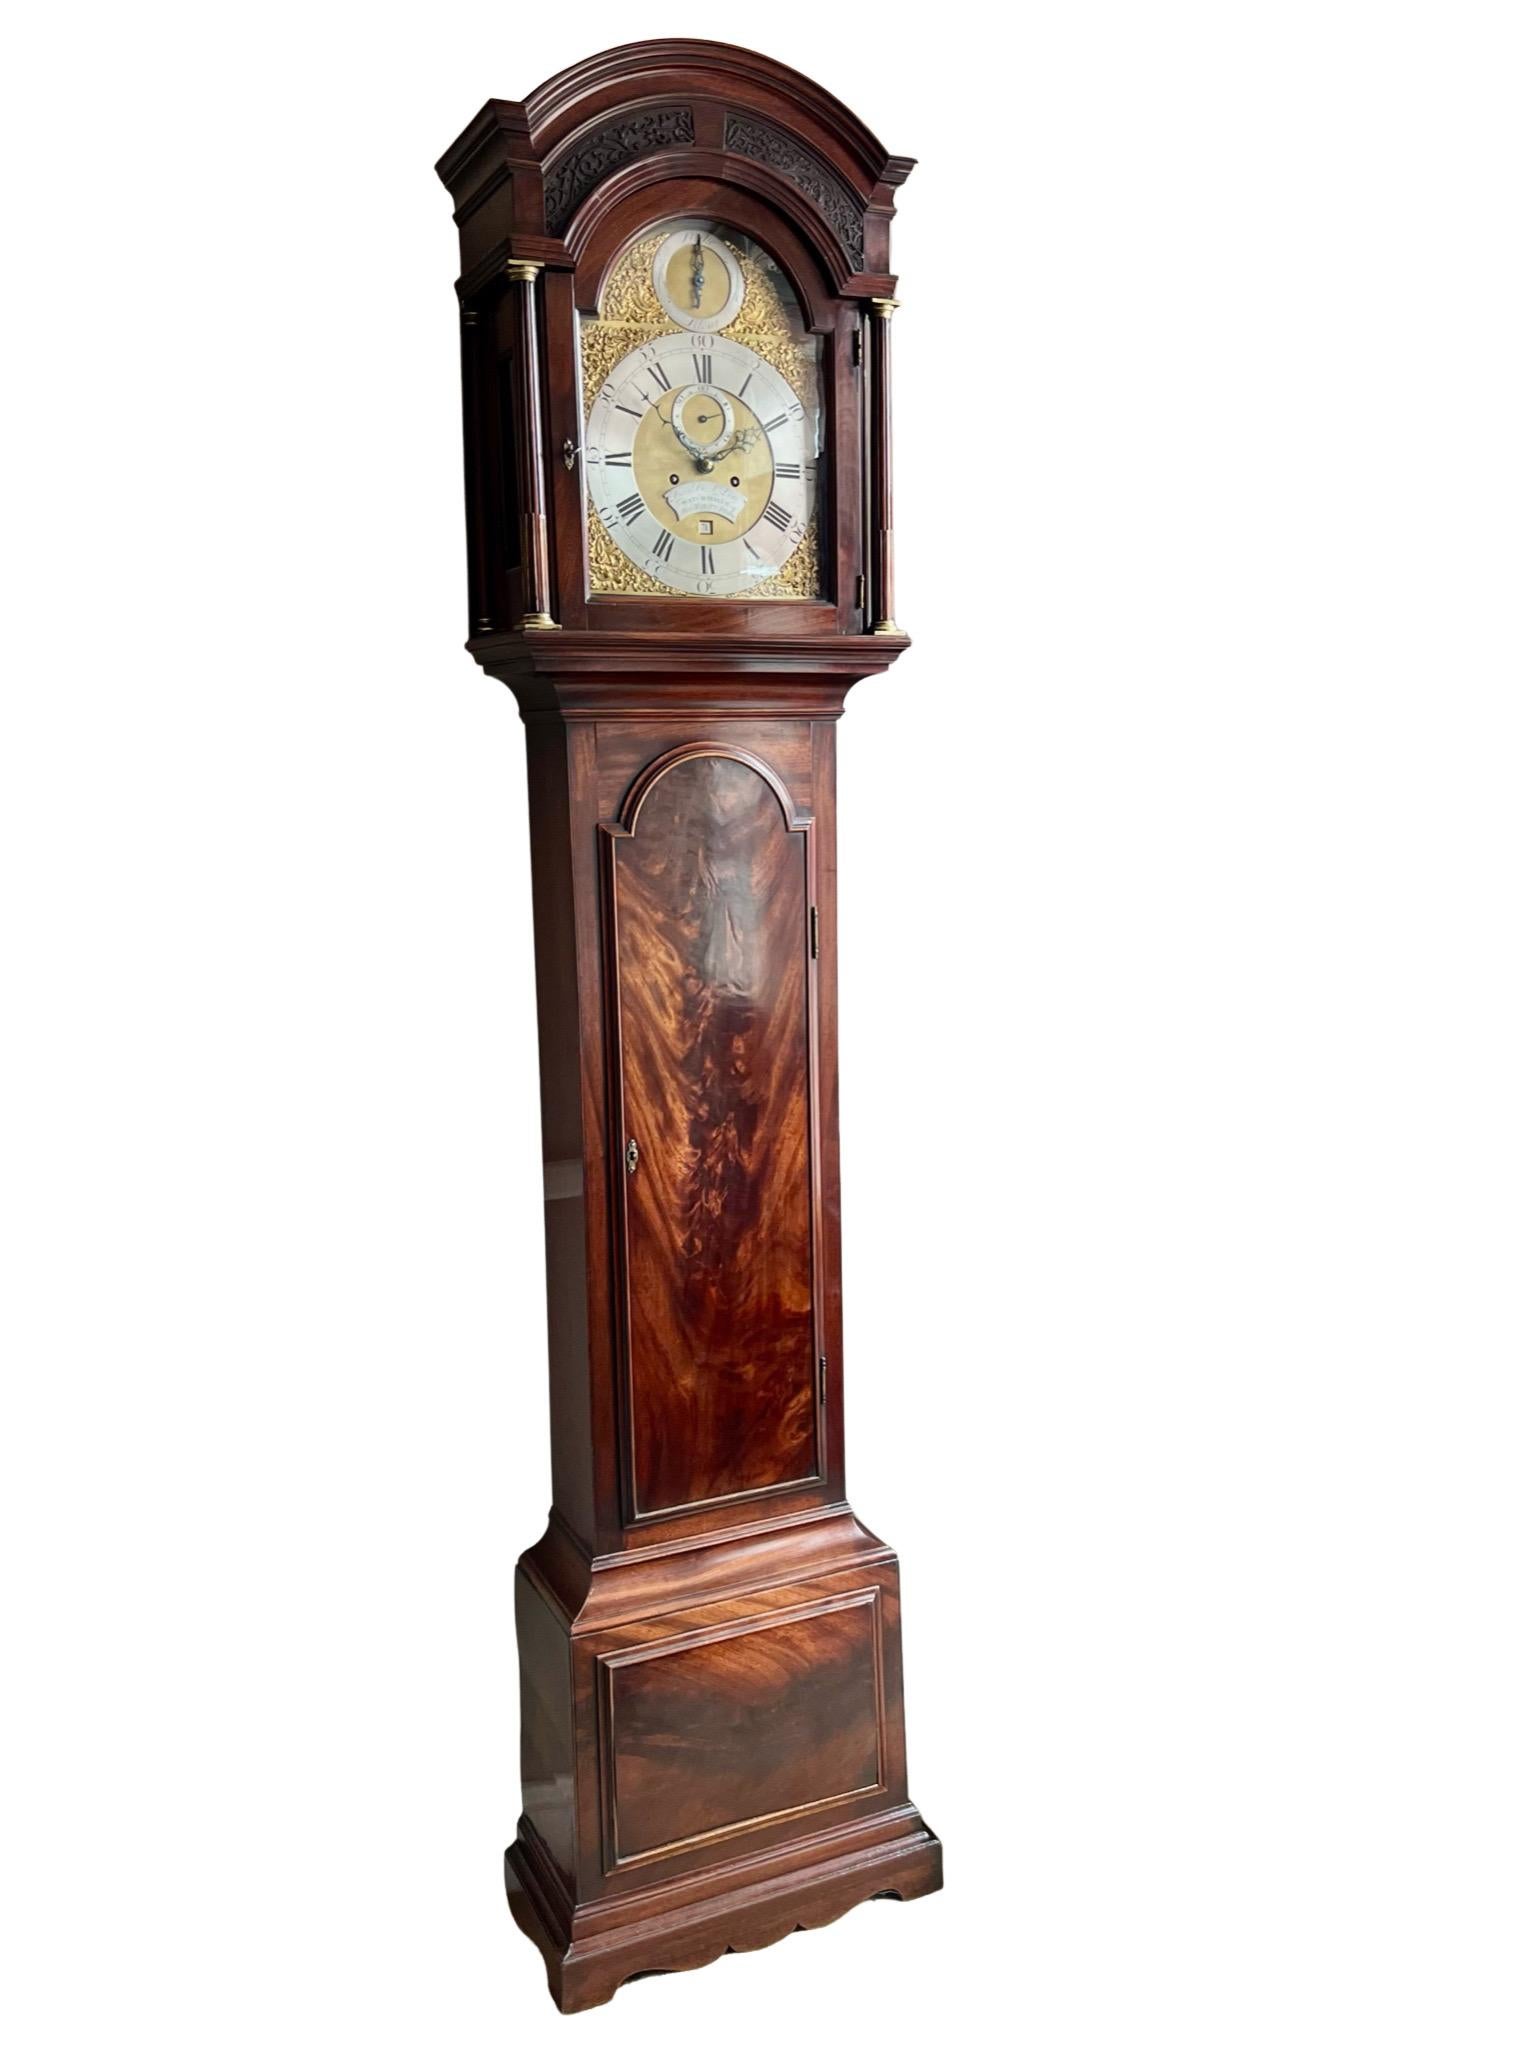 A stunning George III Eight day striking Mahogany longcase clock by Royal Maker Daniel De St. Leu, who was watch and clockmaker to Queen Charlotte, the beloved wife of George III.

This beautiful longcase clock has a very rich colour to the